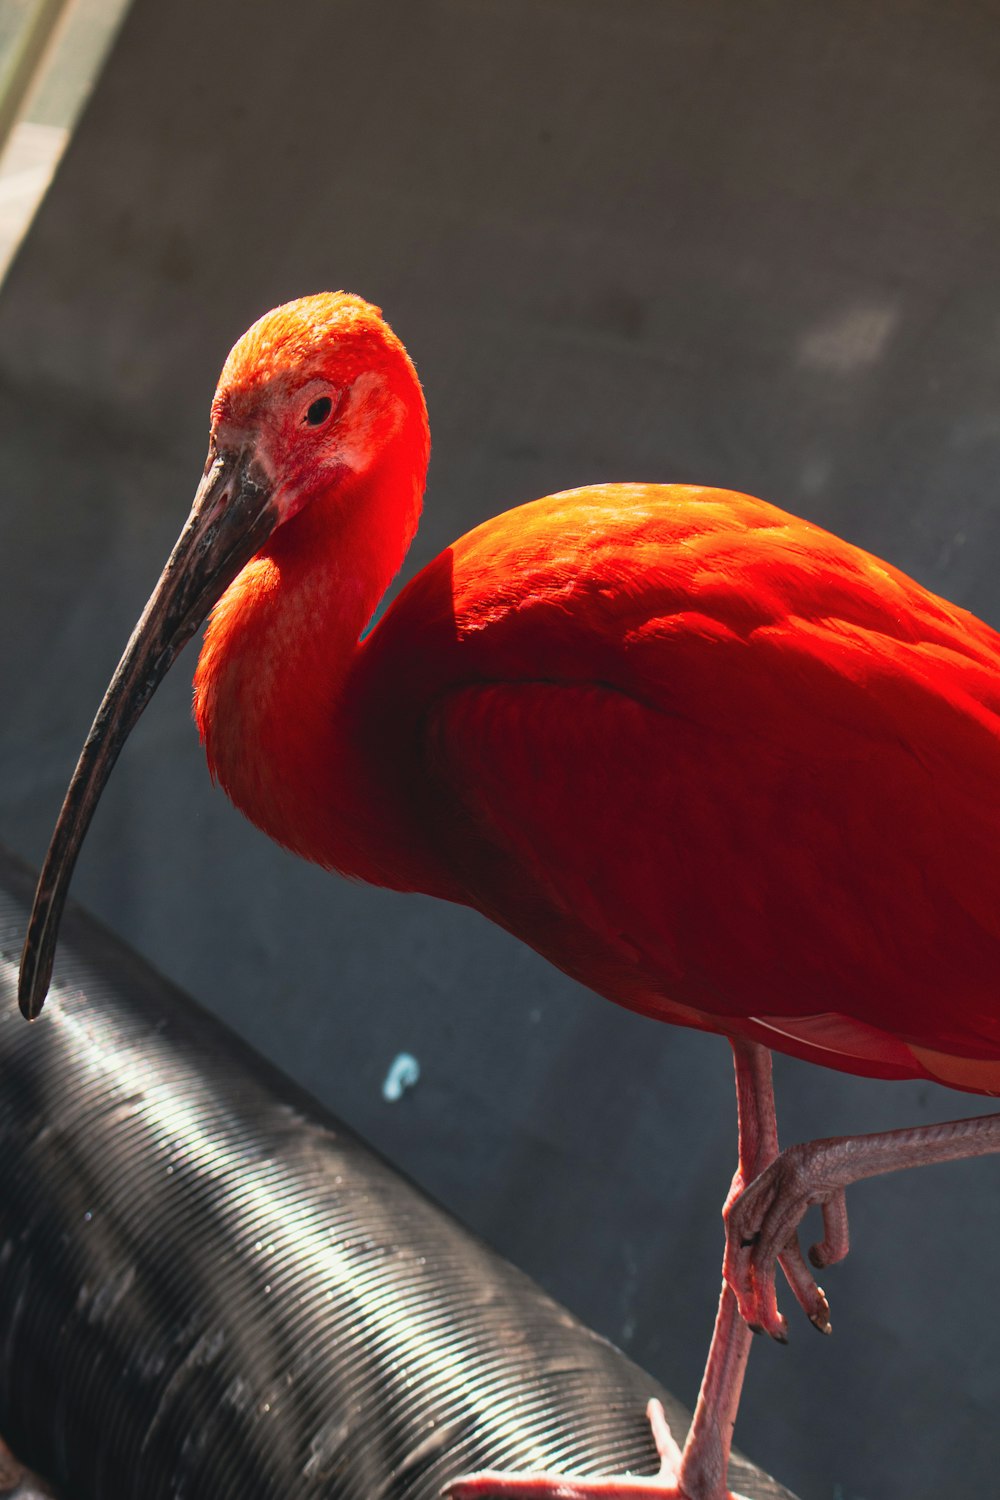 a large red bird with a long beak